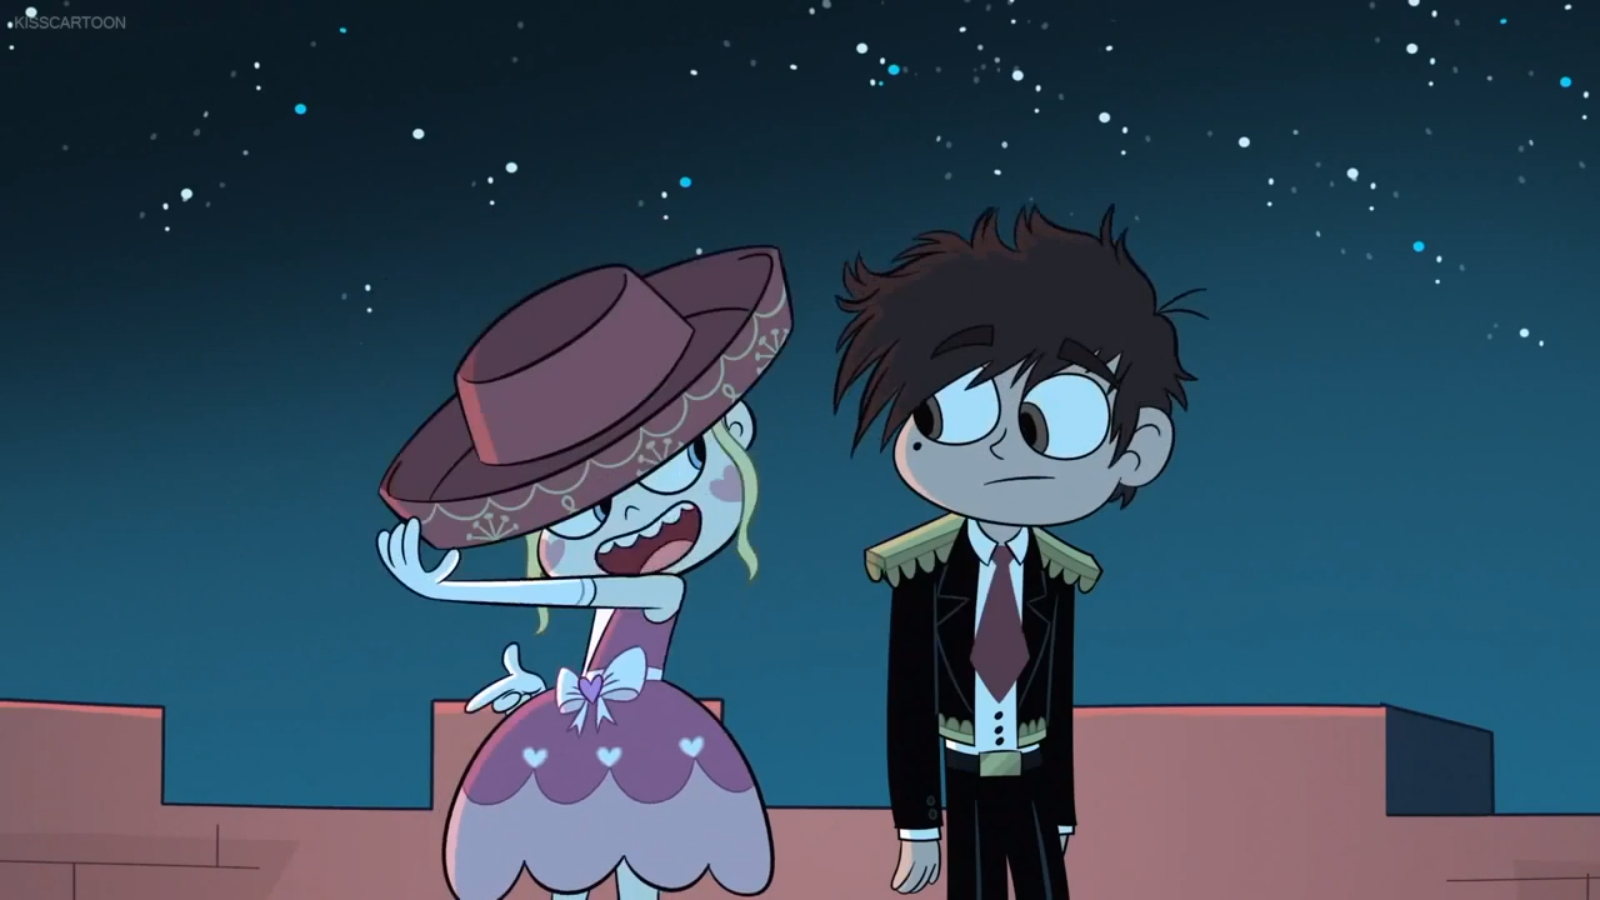 Blood Moon Ball Wallpaper Vs The Forces Of Evil Wallpaper